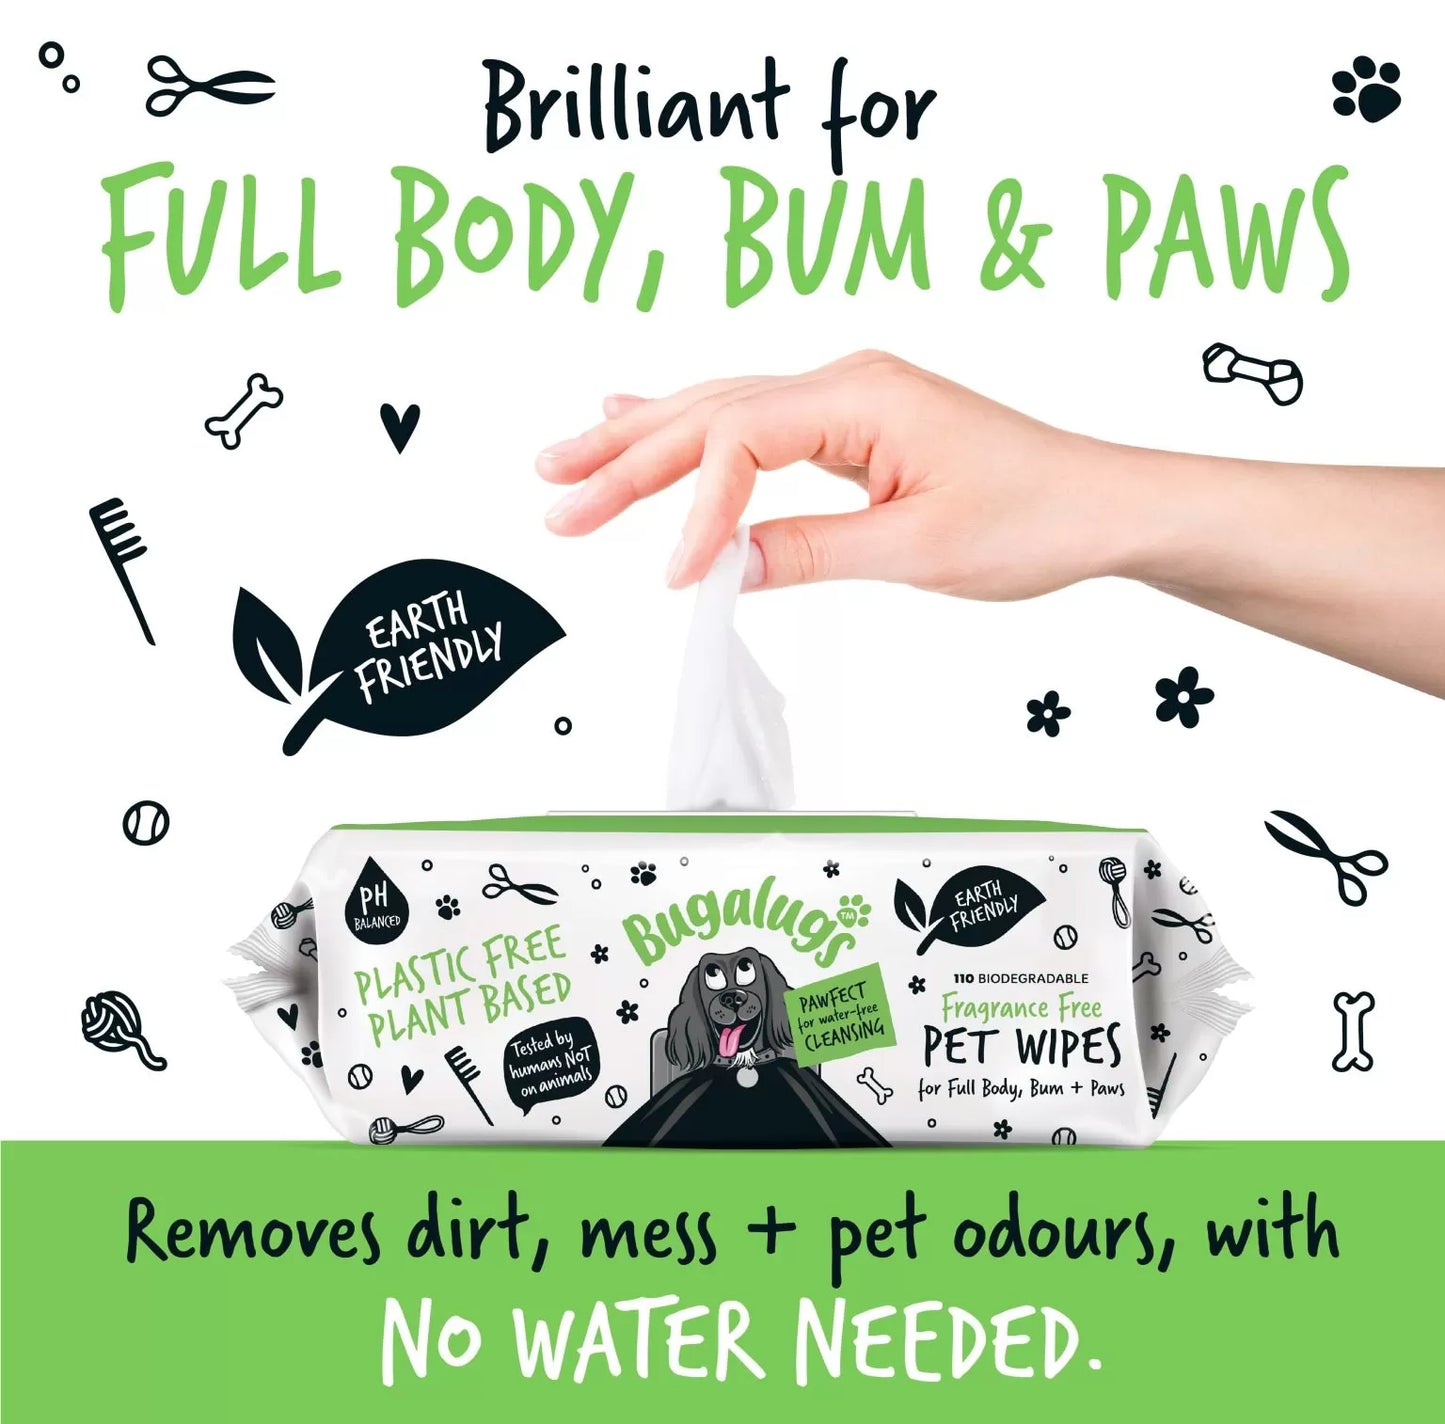 Bugalugs Biodegradable Fragrance Free Pet Wipes 50gsm